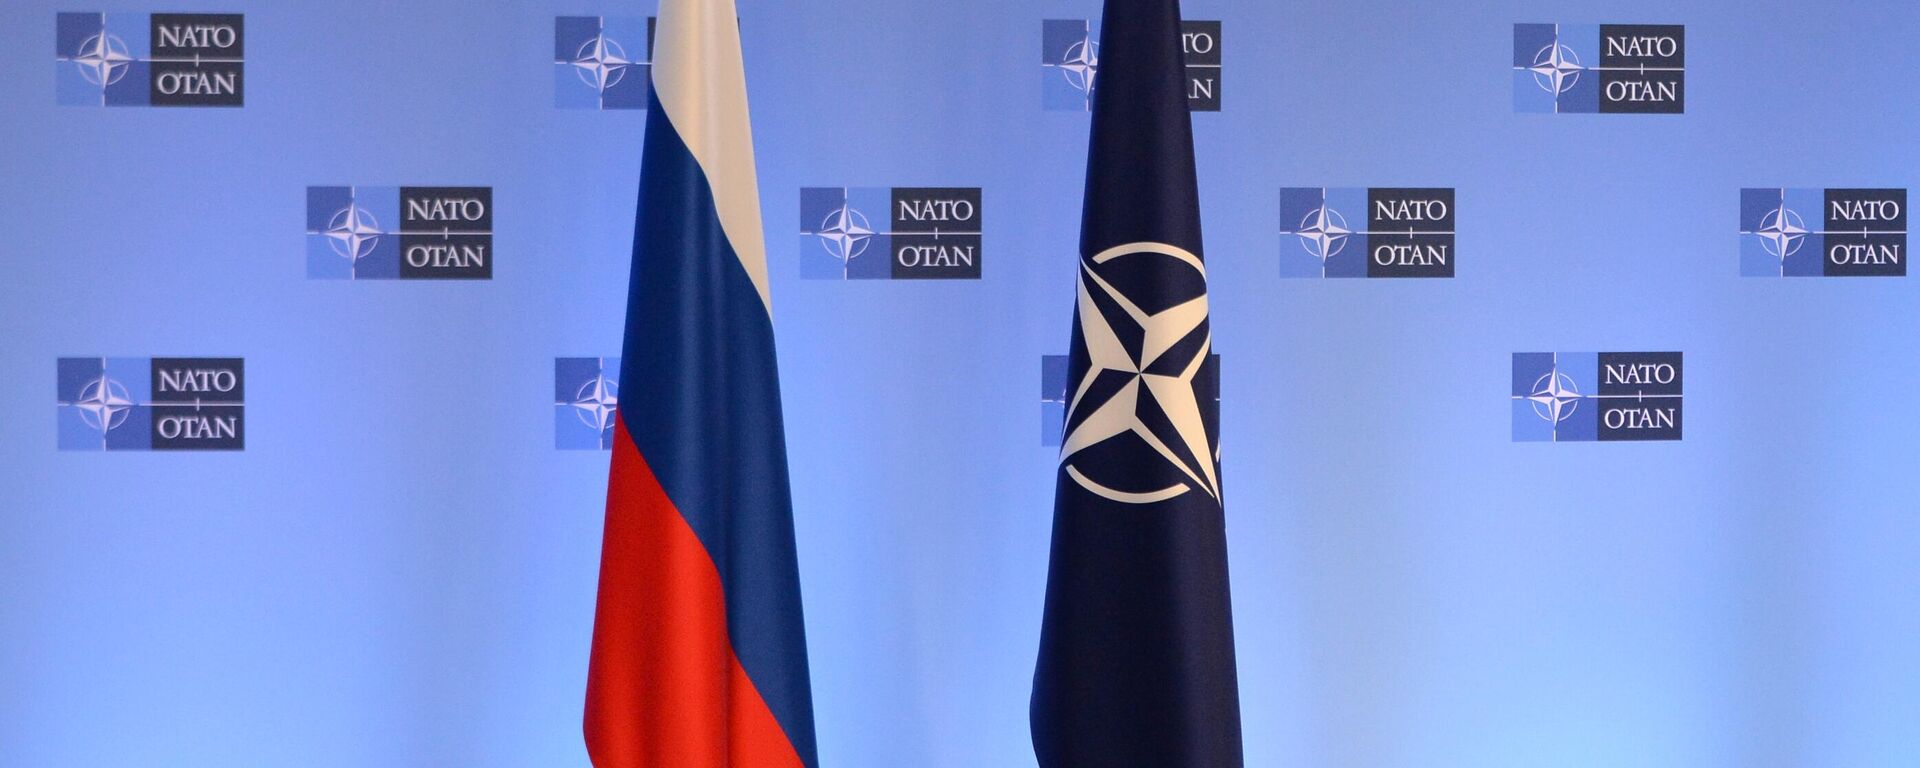 Russian and NATO flags are seen before the Russia - NATO talks in Brussels, Belgium - Sputnik International, 1920, 07.03.2022